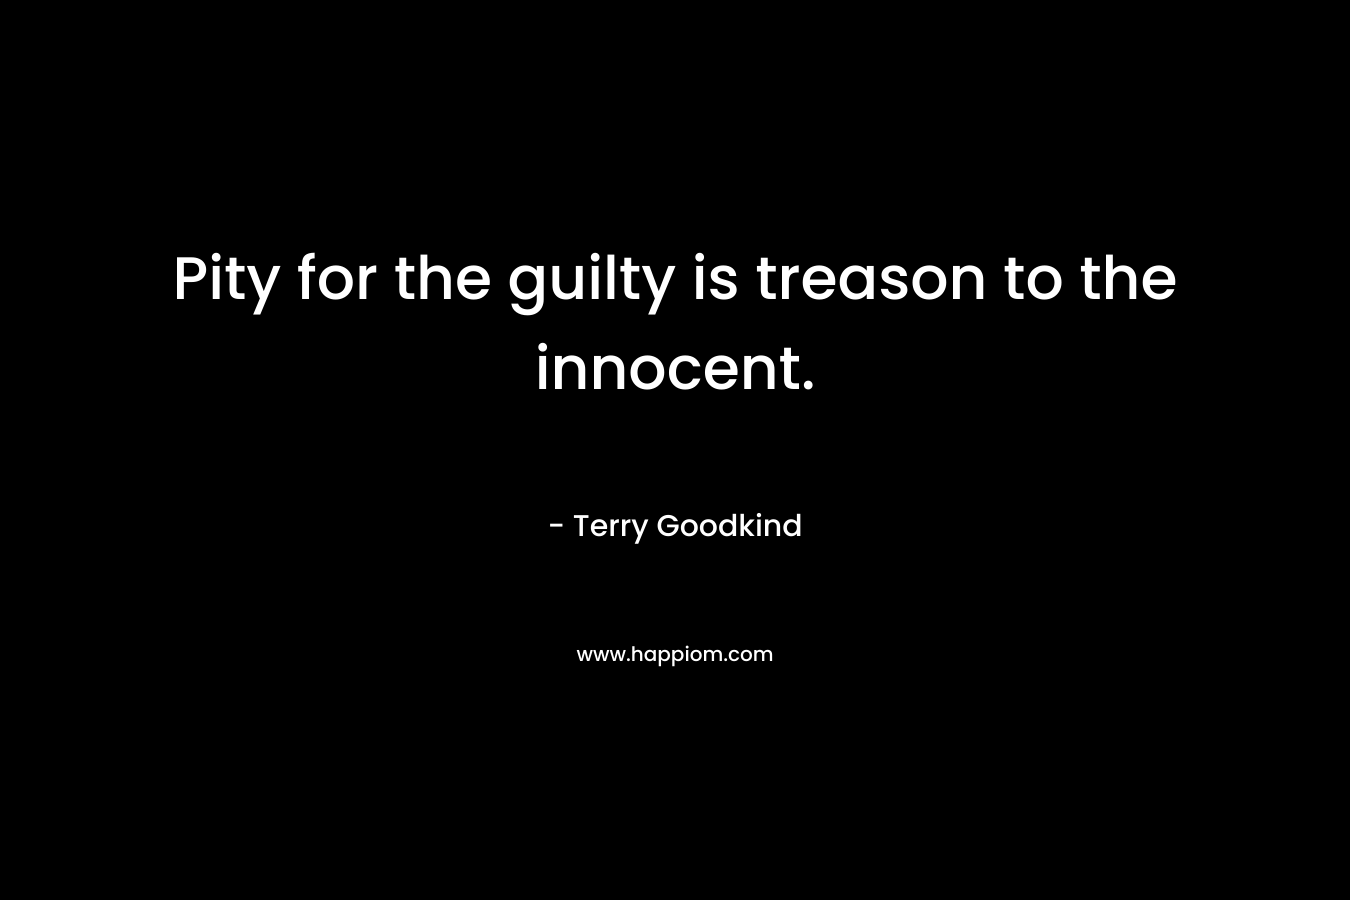 Pity for the guilty is treason to the innocent. – Terry Goodkind